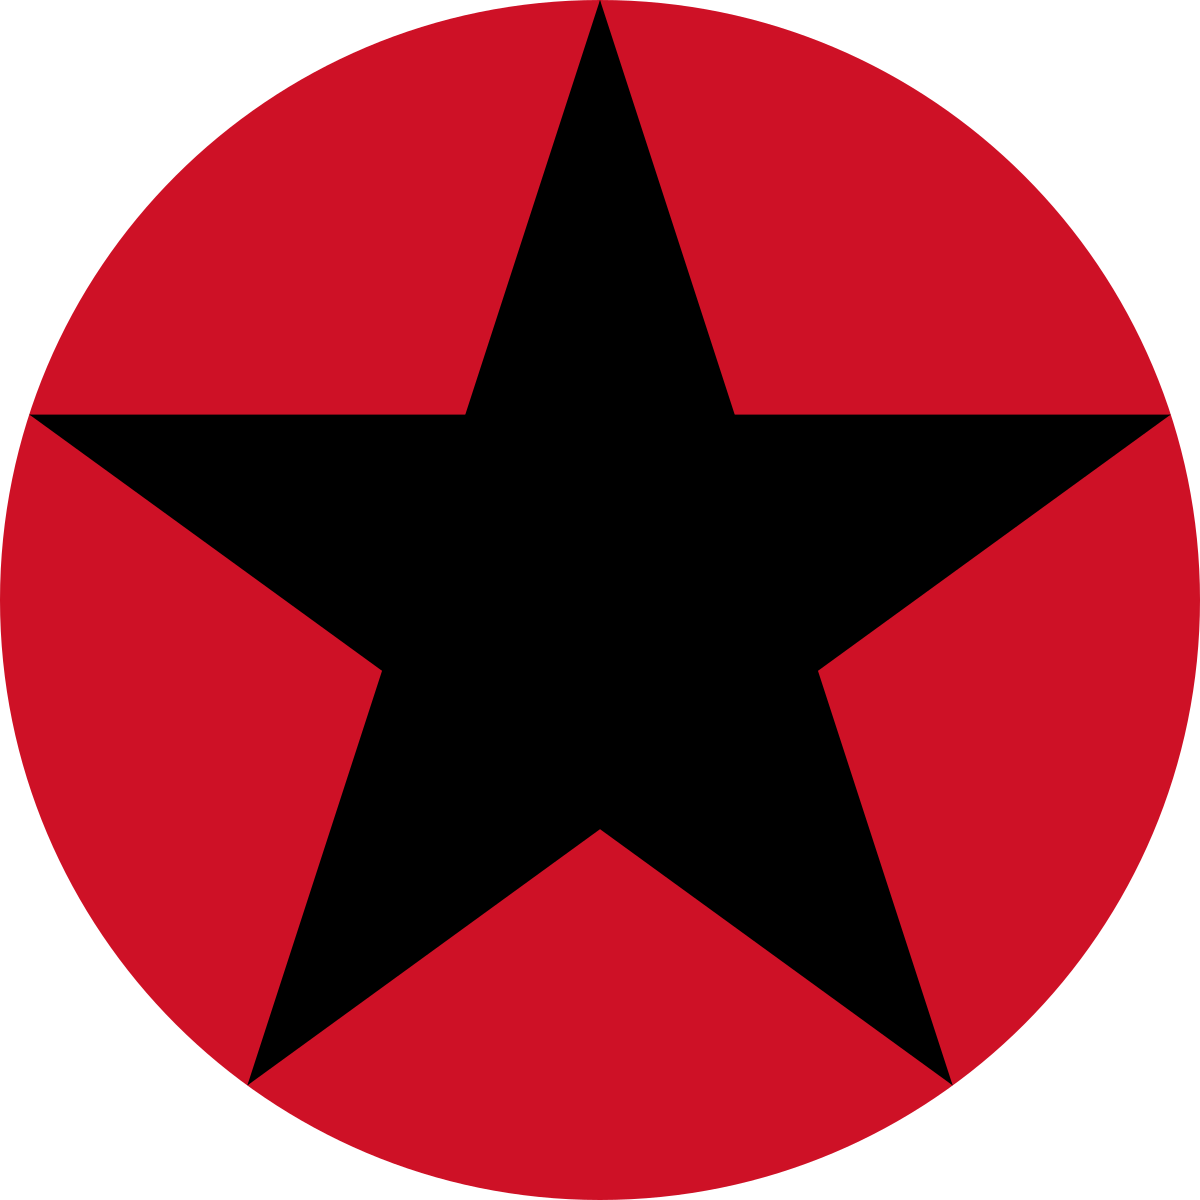 Red Circle With Star In The Middle Clipart - Black Star Red Background (1200x1200)